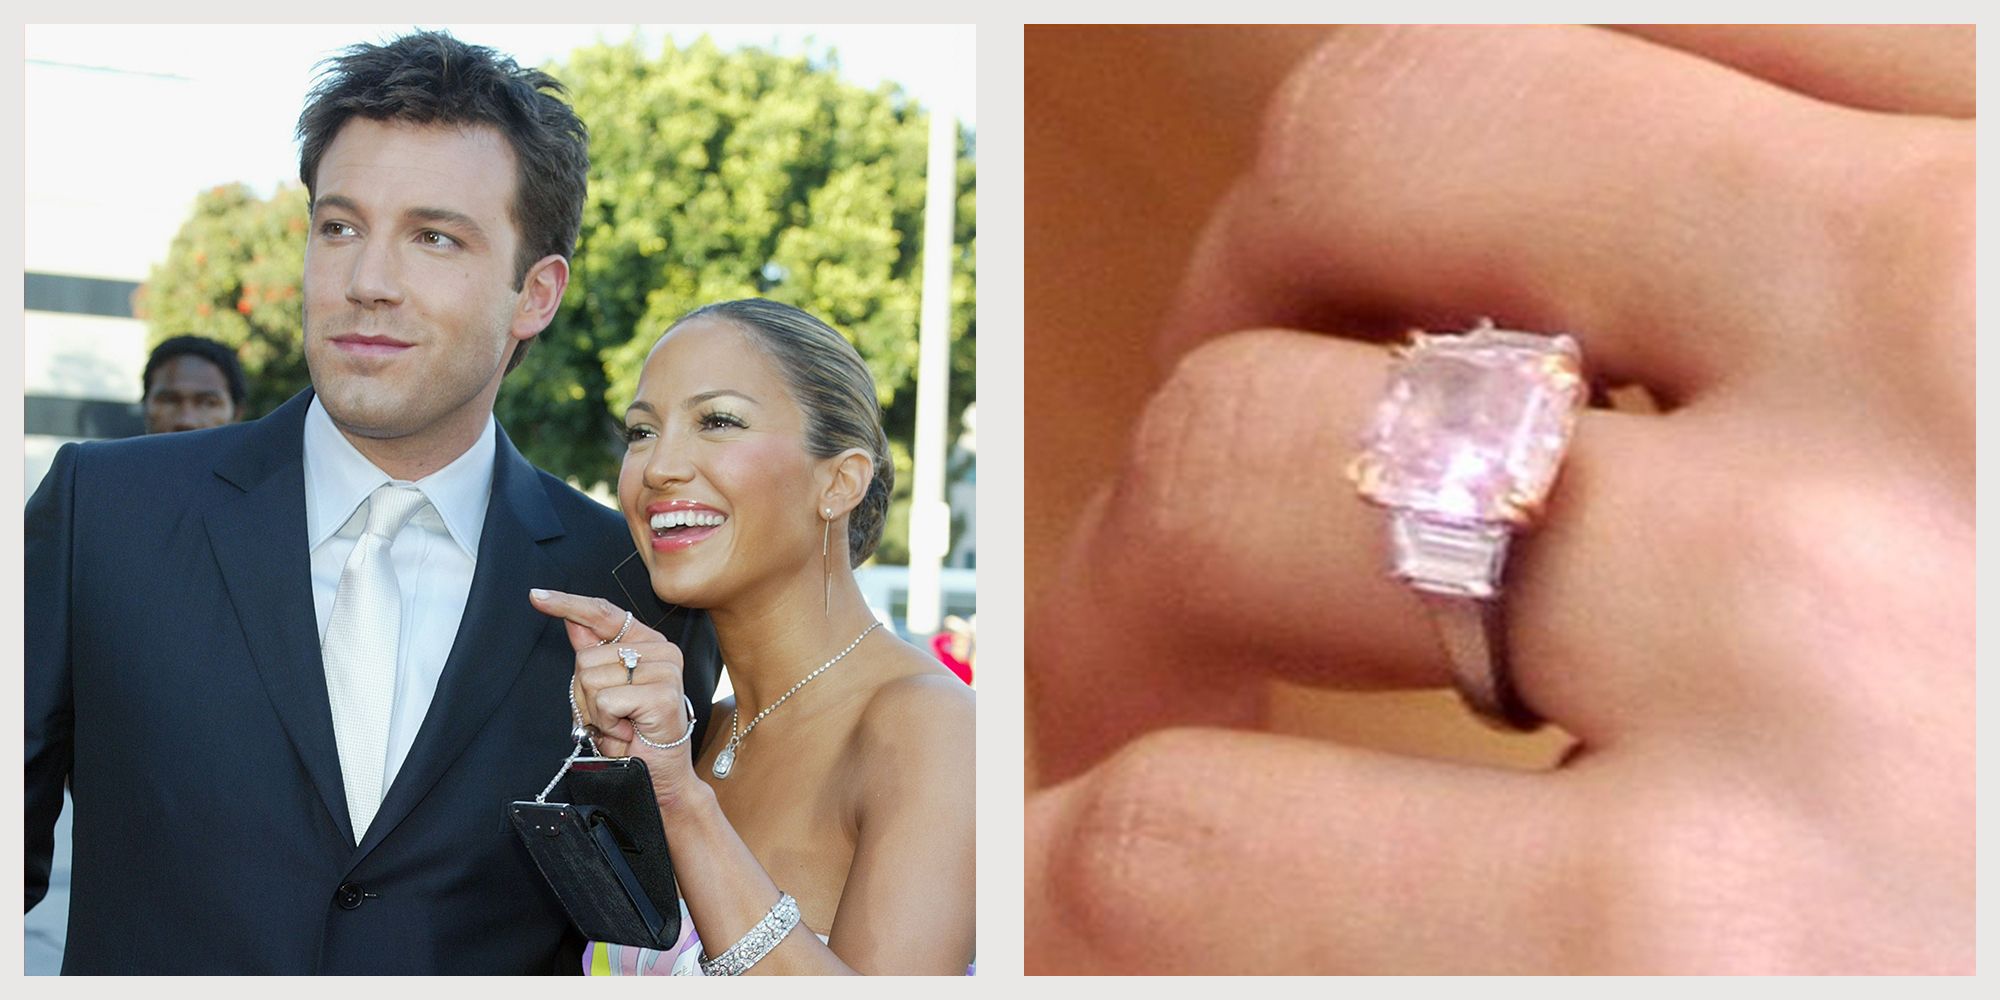 The Story of Jennifer Lopez's Pink Diamond Engagement Ring From Ben Affleck